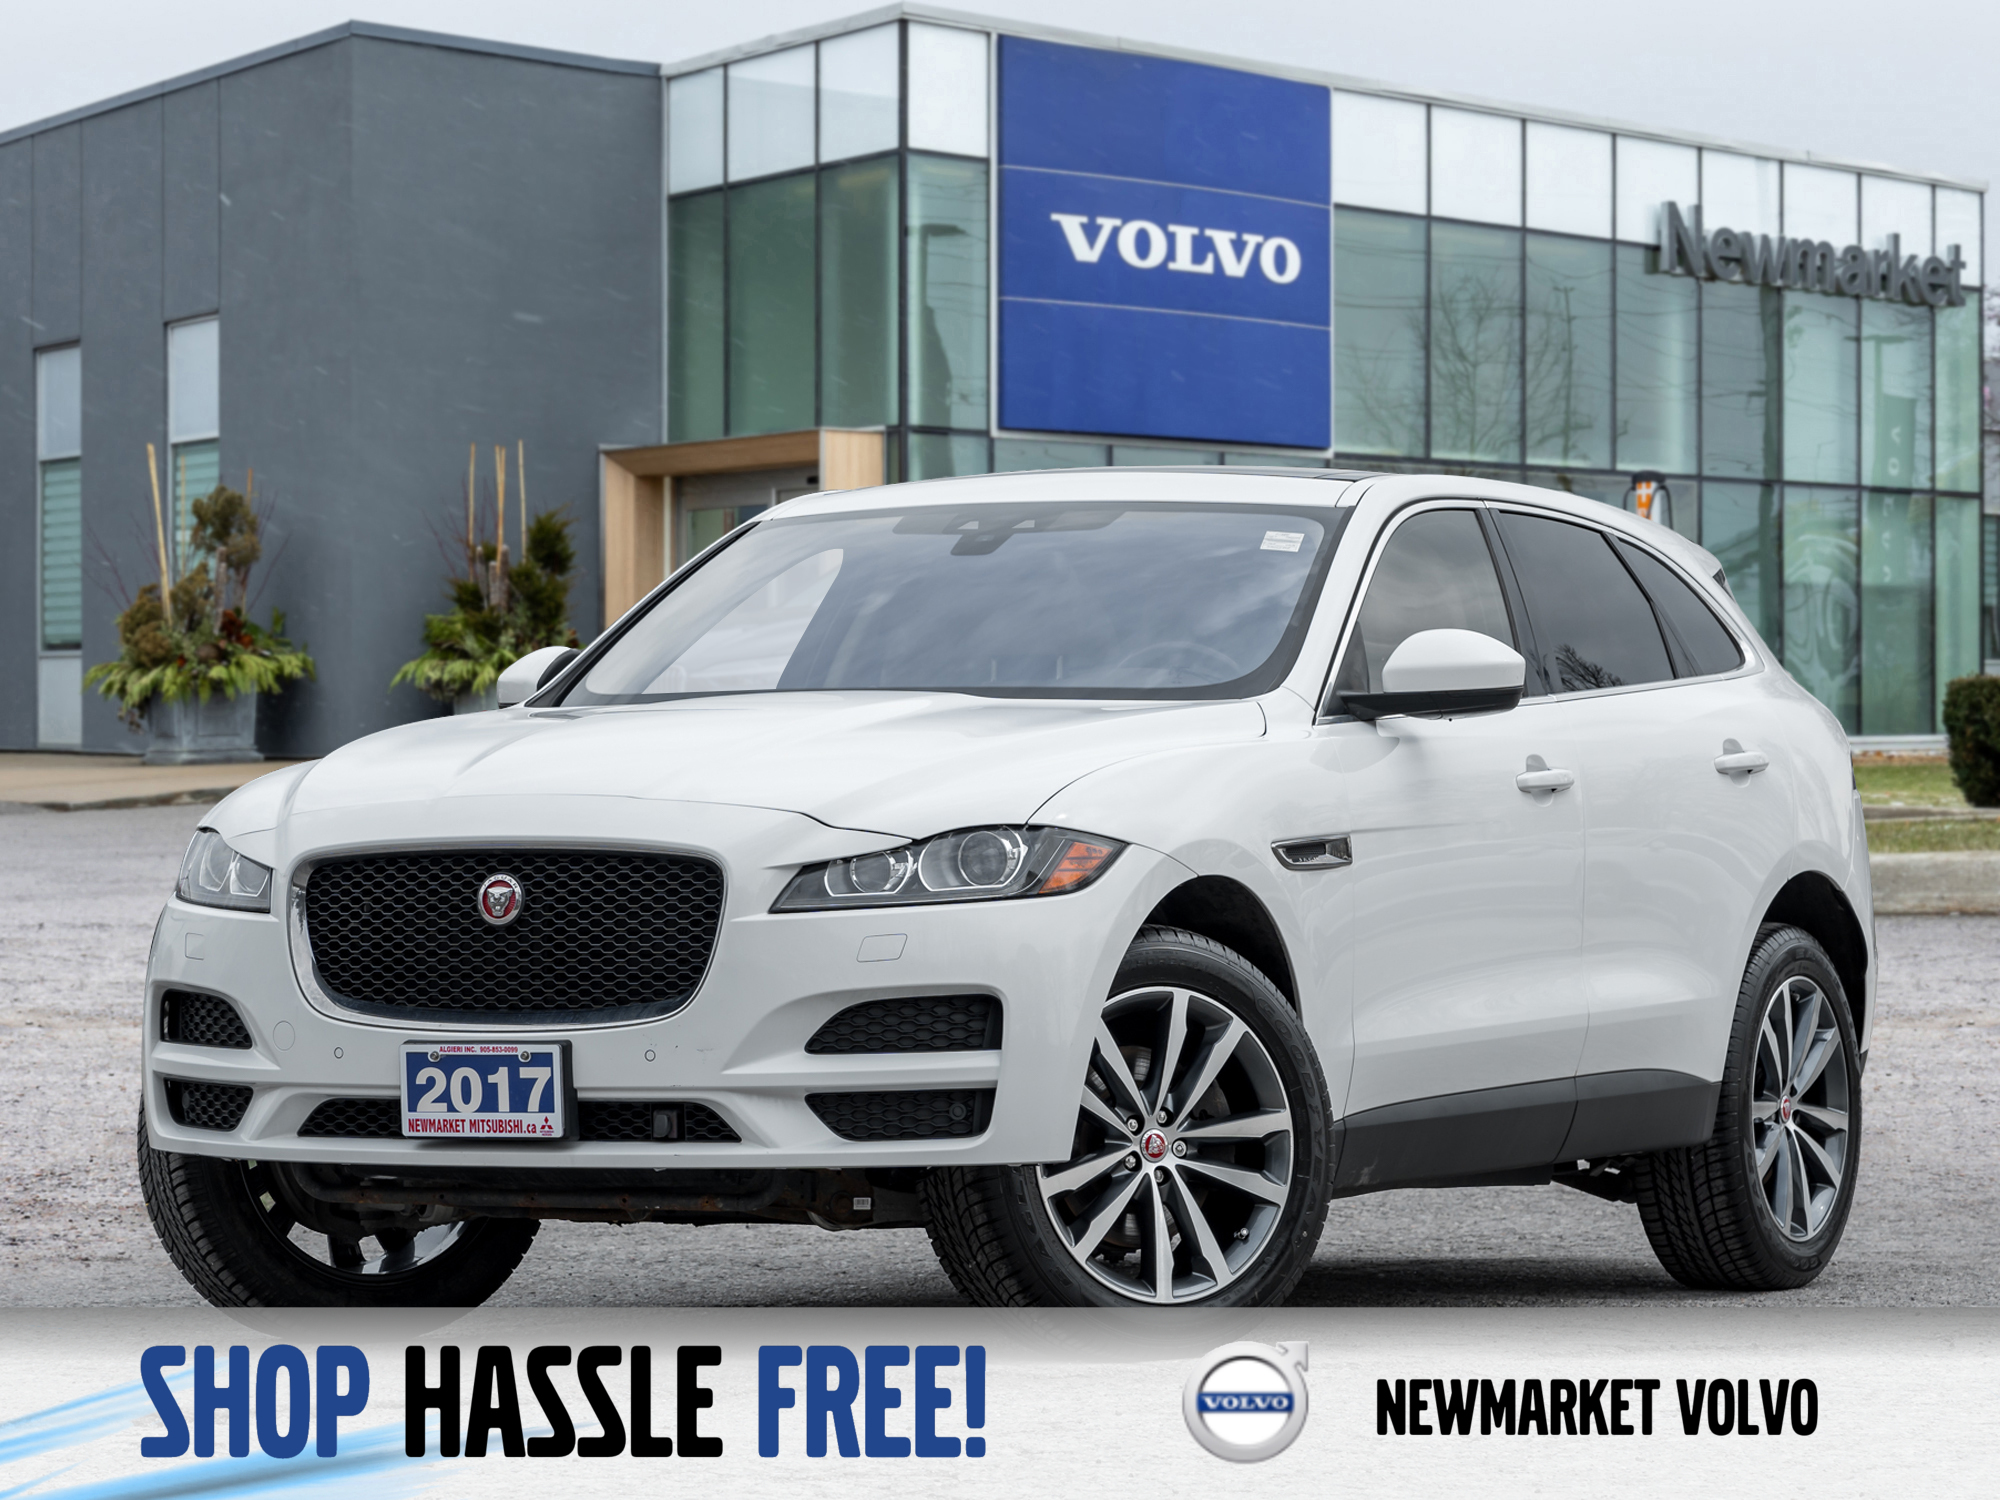 2017 Jaguar F-Pace AWD 4dr 35t Prestige |NEW TIRES |SAFETY CERTIFIED